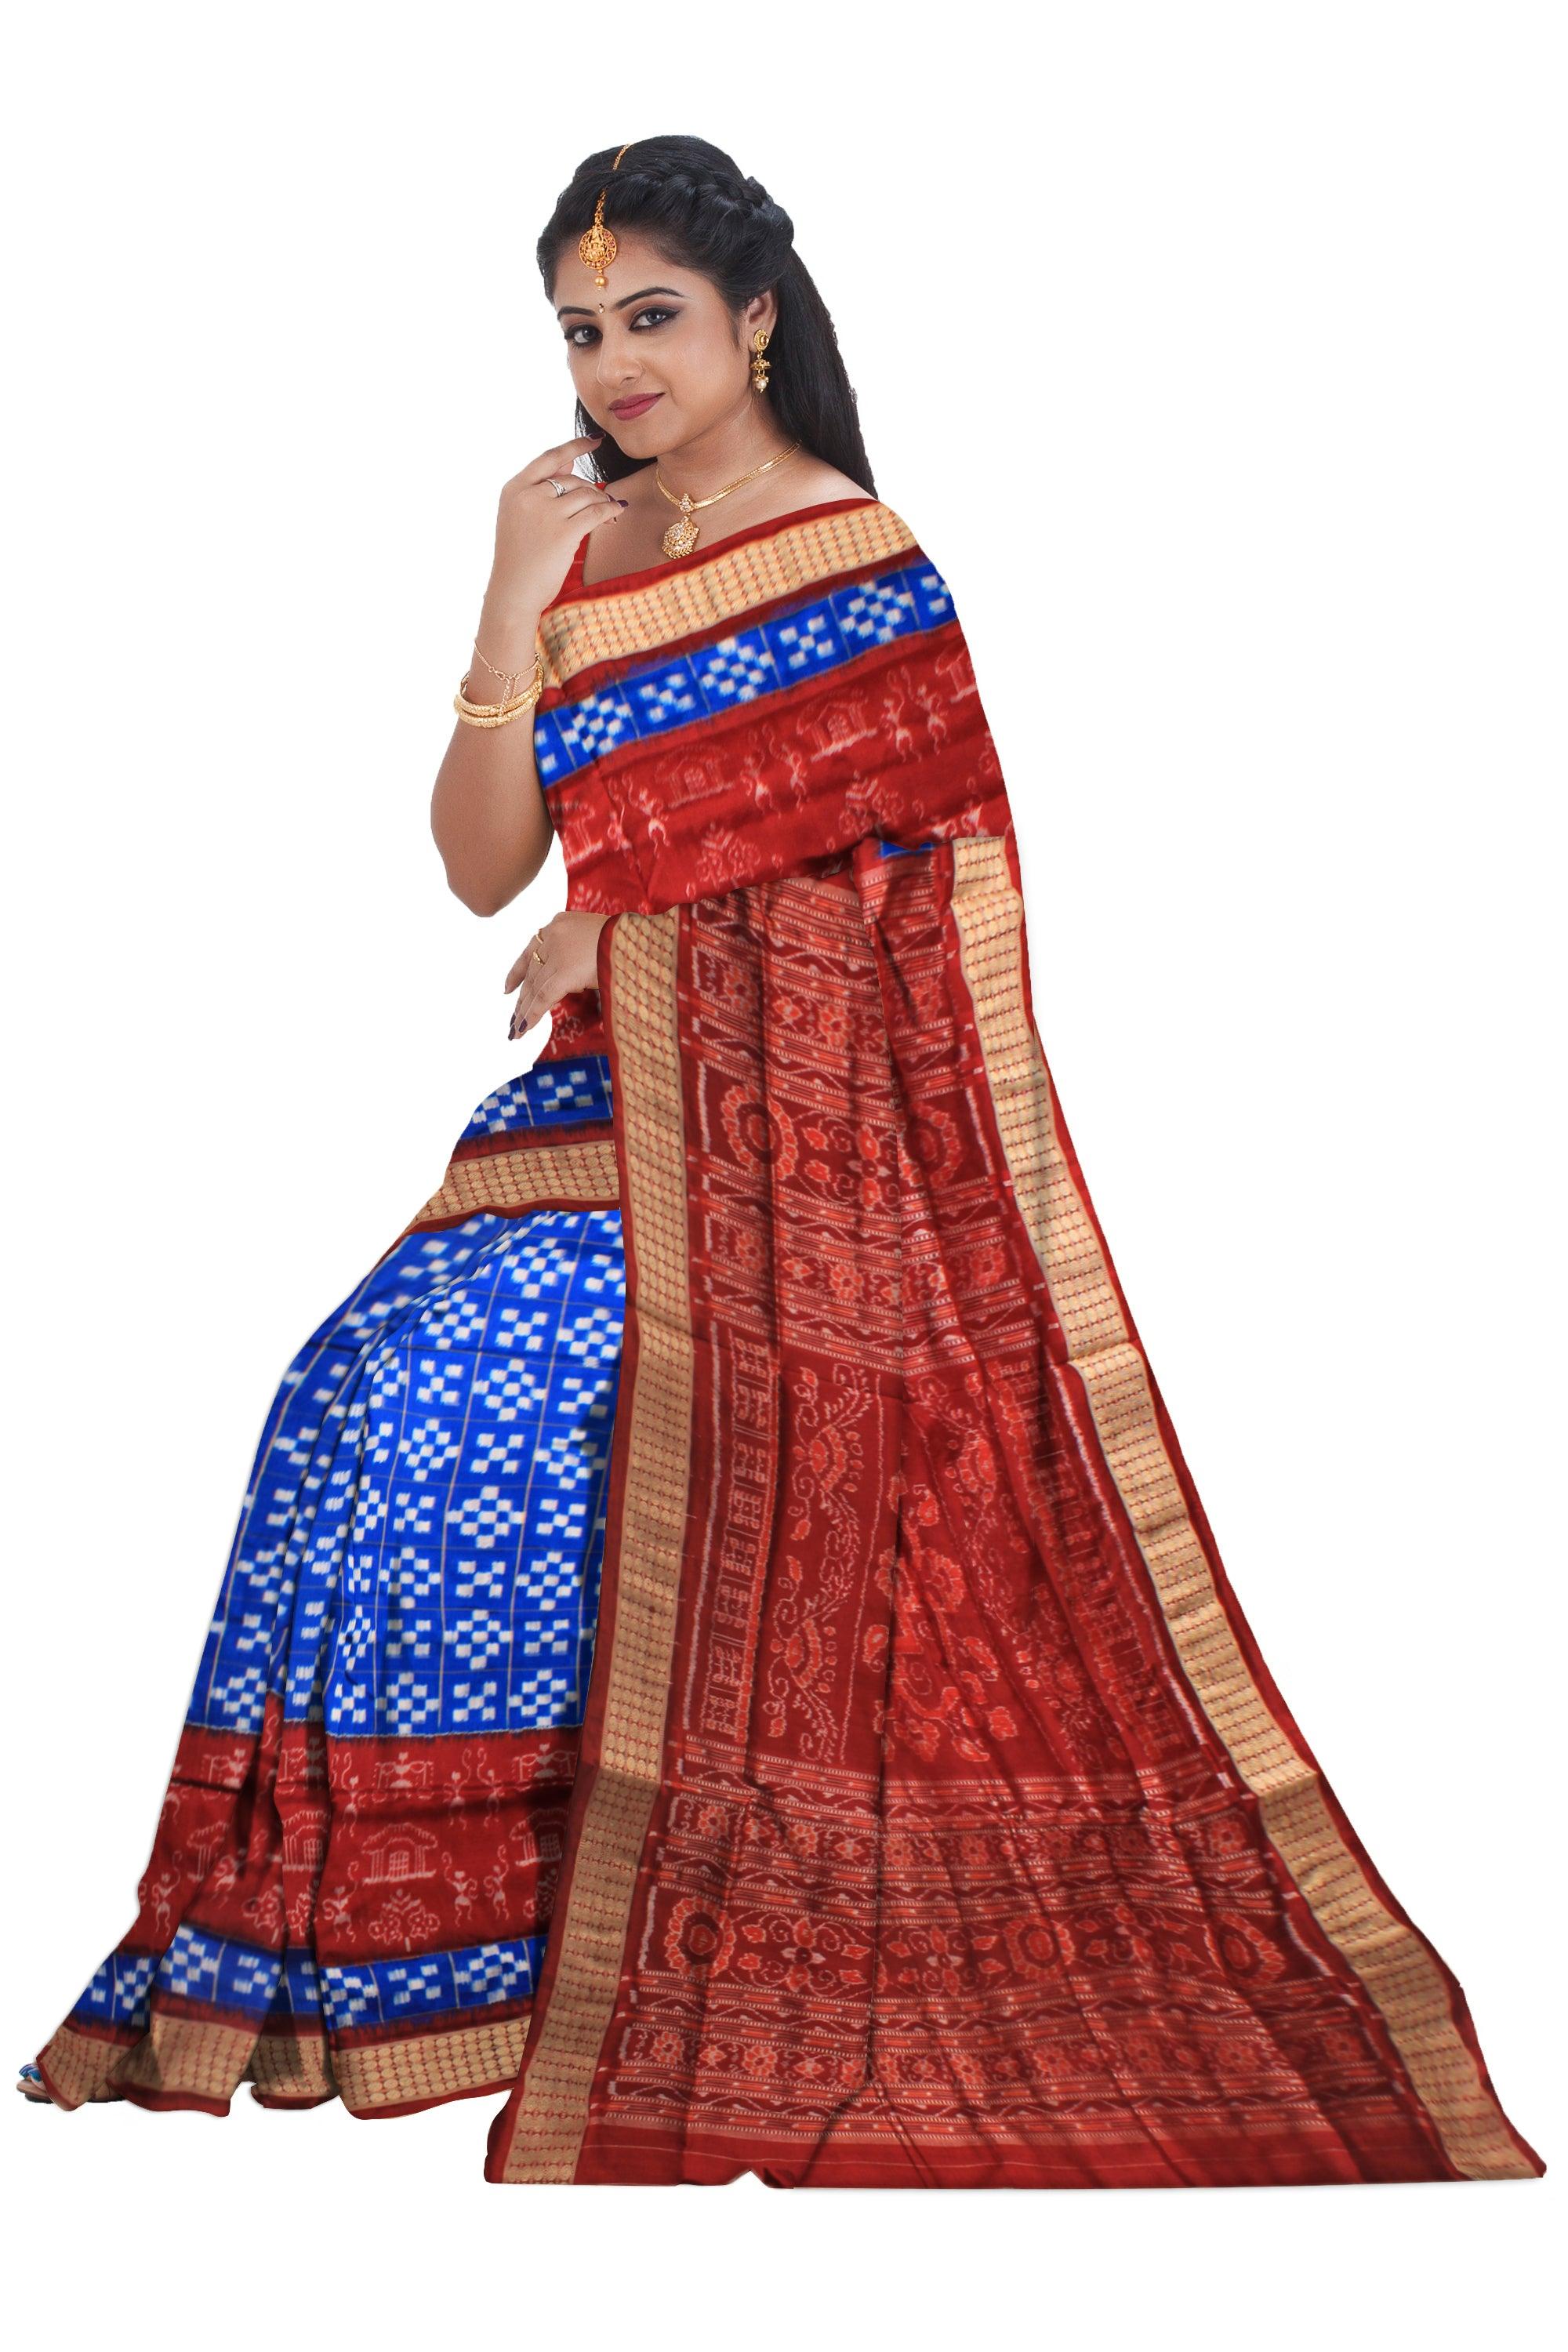 HANDWOVEN BLUE  AND MAROON COLOR VILLAGE THEME AND TRIBAL MOTIFS PASAPALI SILK SAREE WITH BLOUSE PIECE. - Koshali Arts & Crafts Enterprise